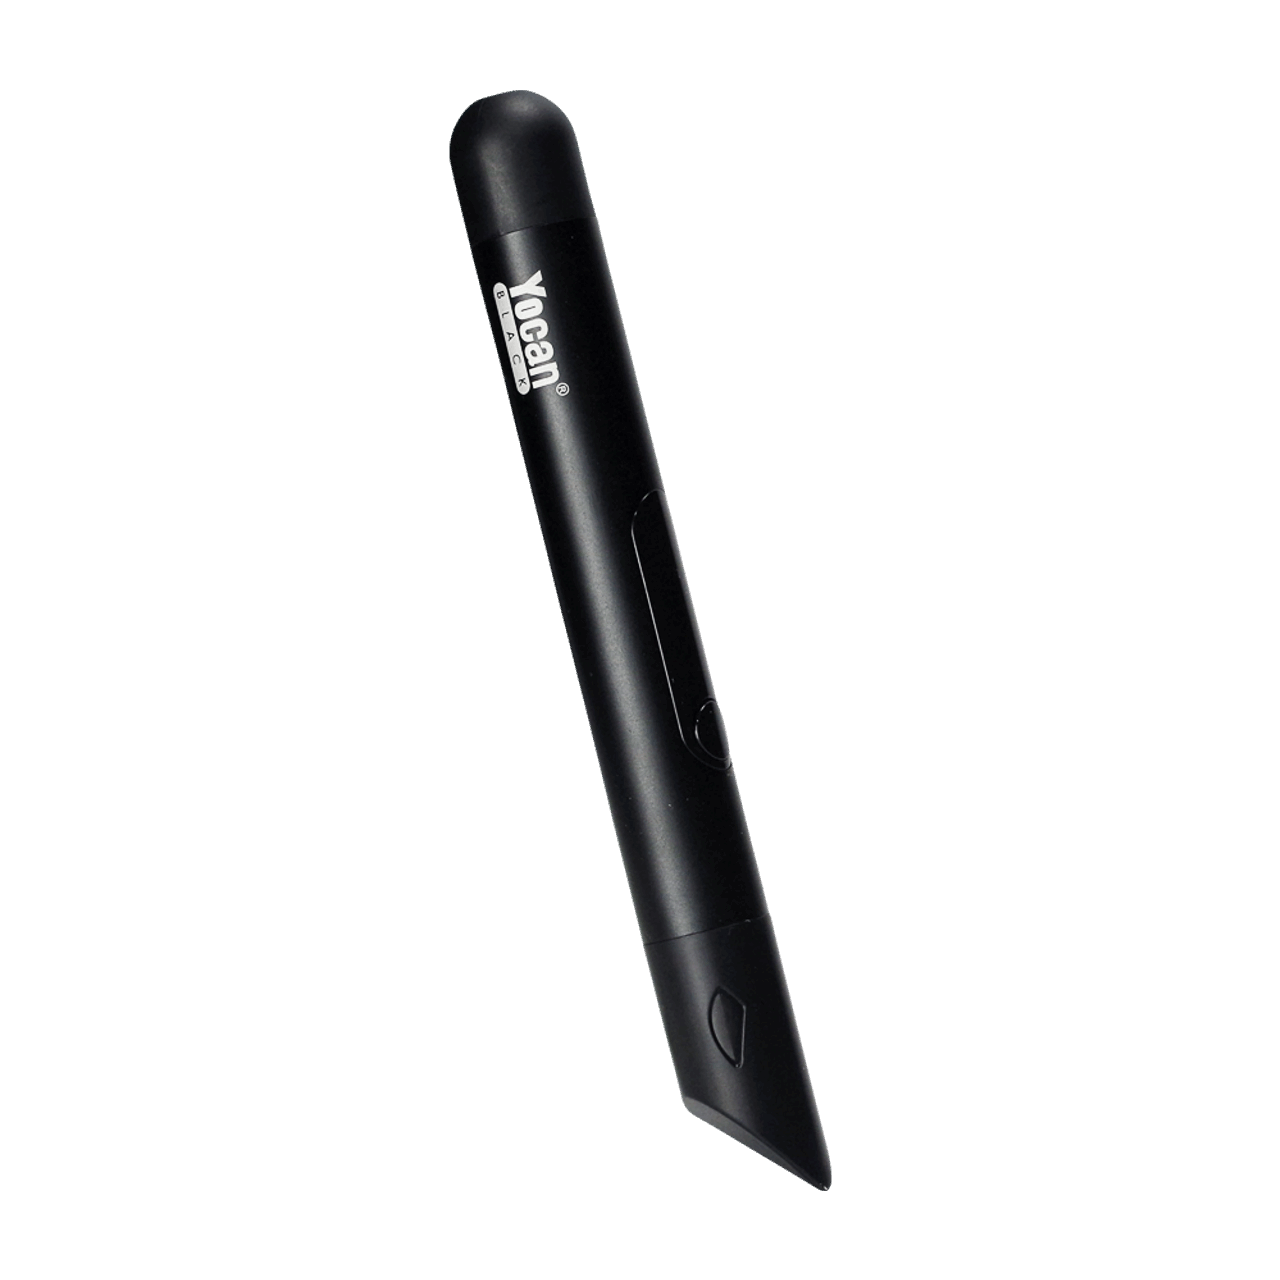 Yocan Jaws Hot Knife Electric Dab Tool - $39.99